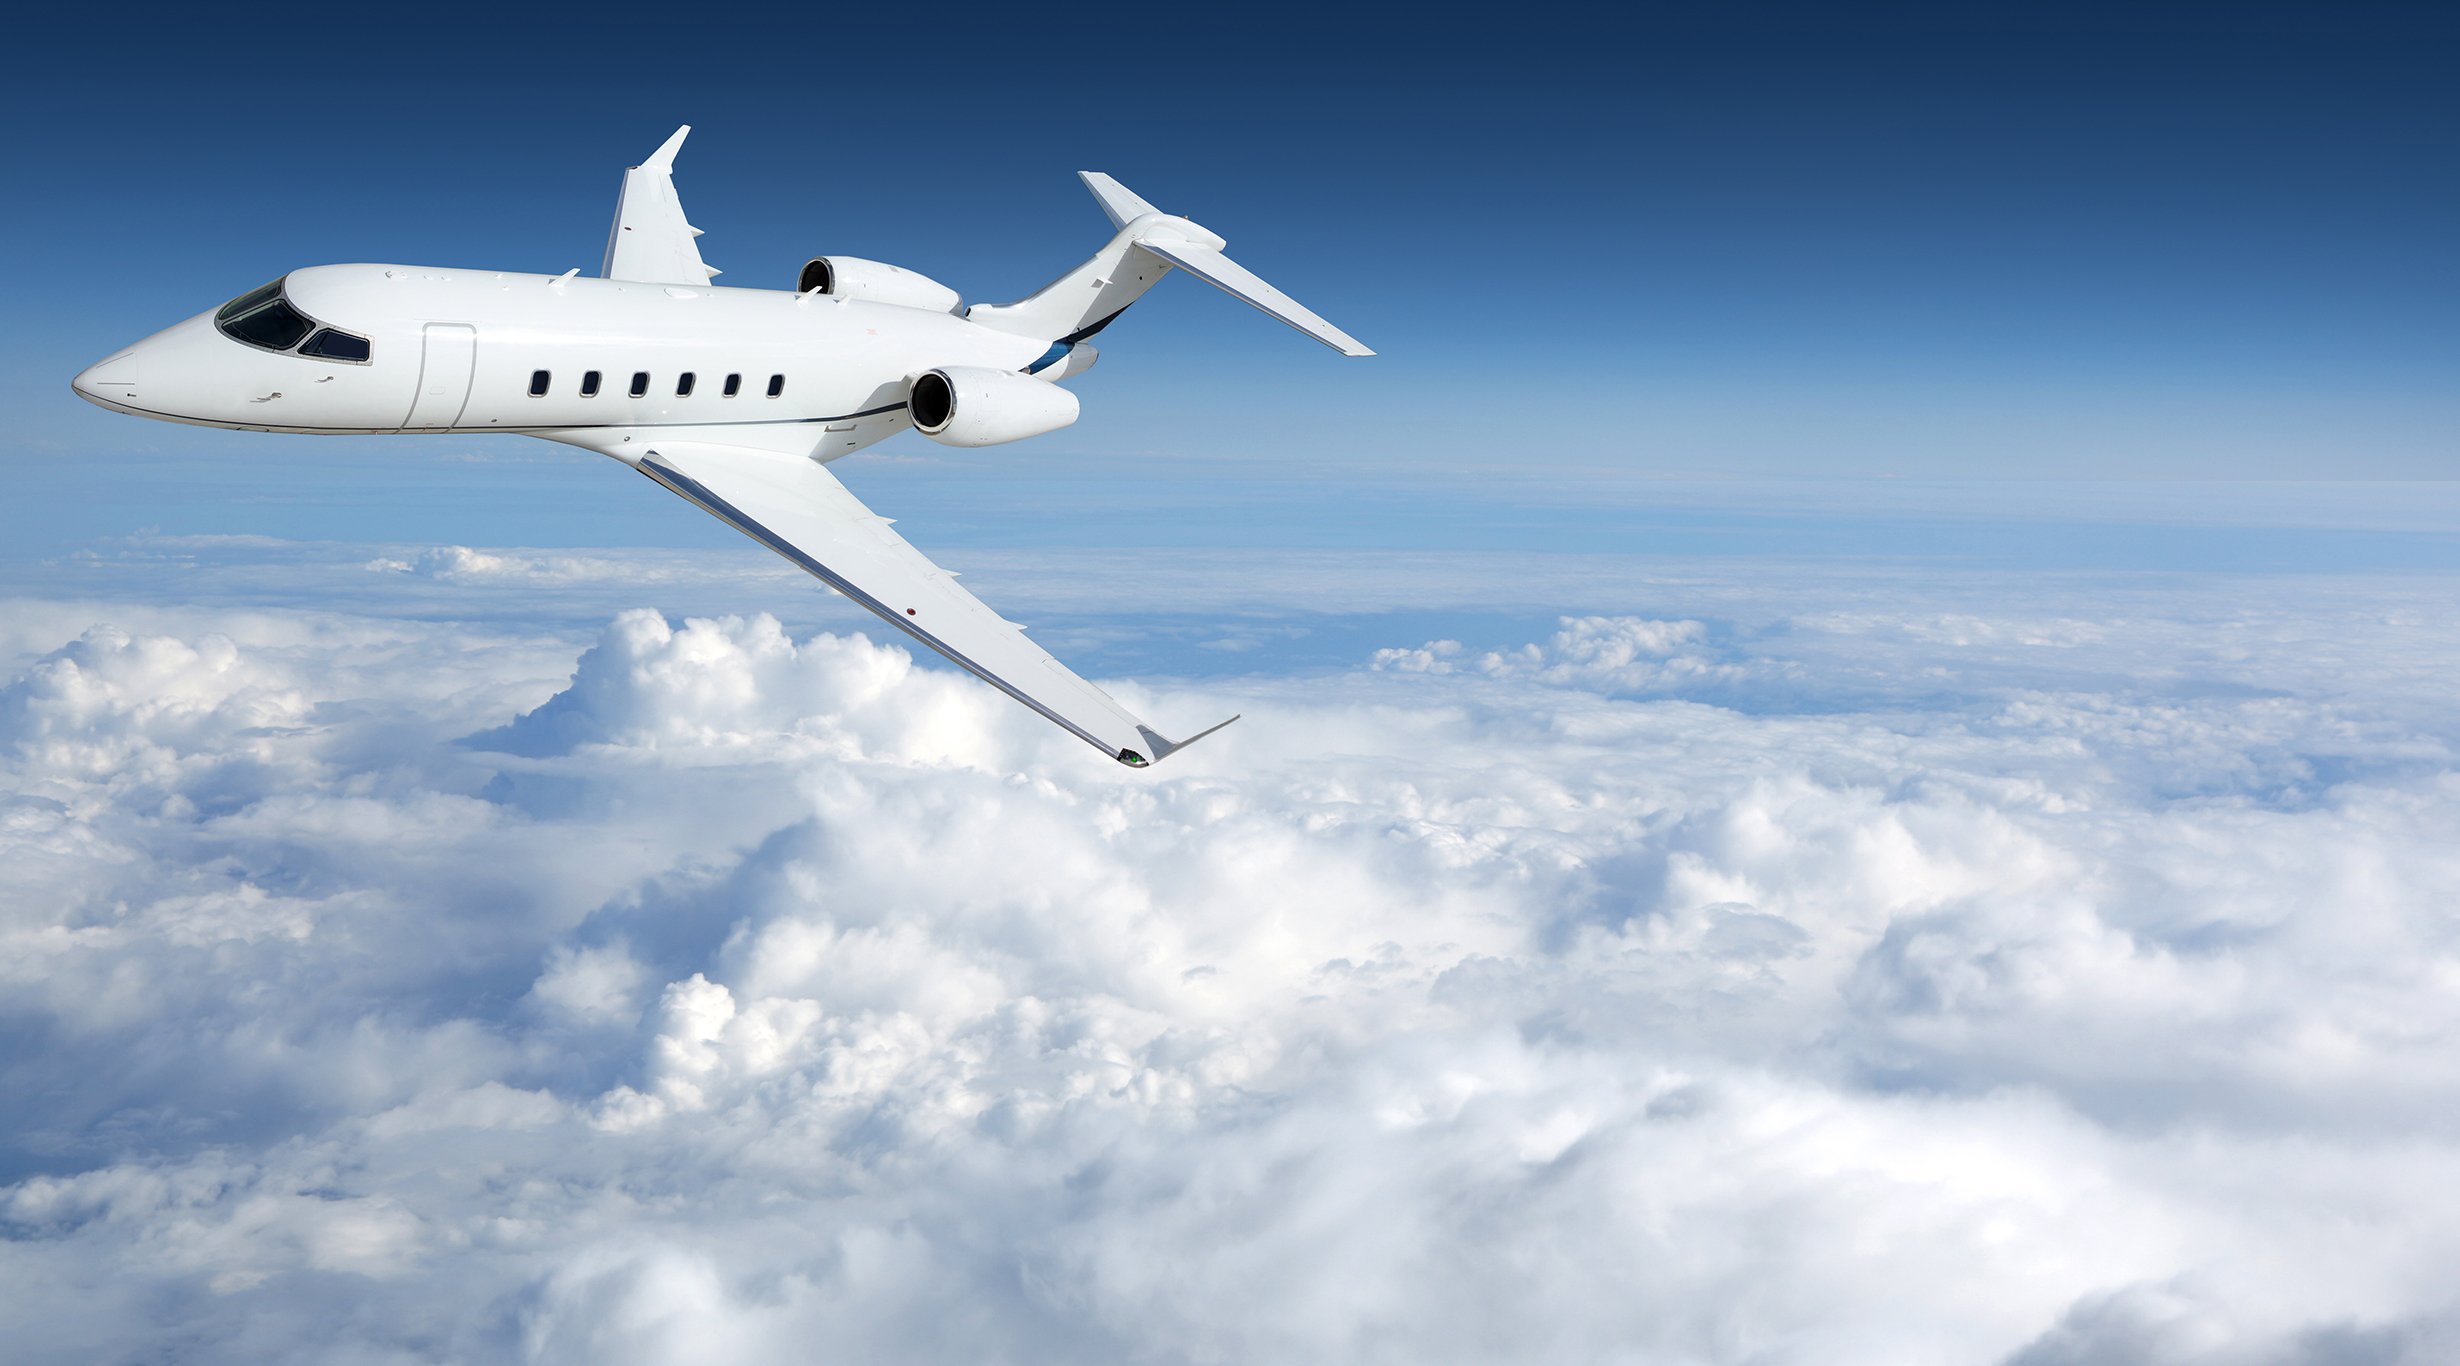 Will private jets be banned in the EU? - Falstaff